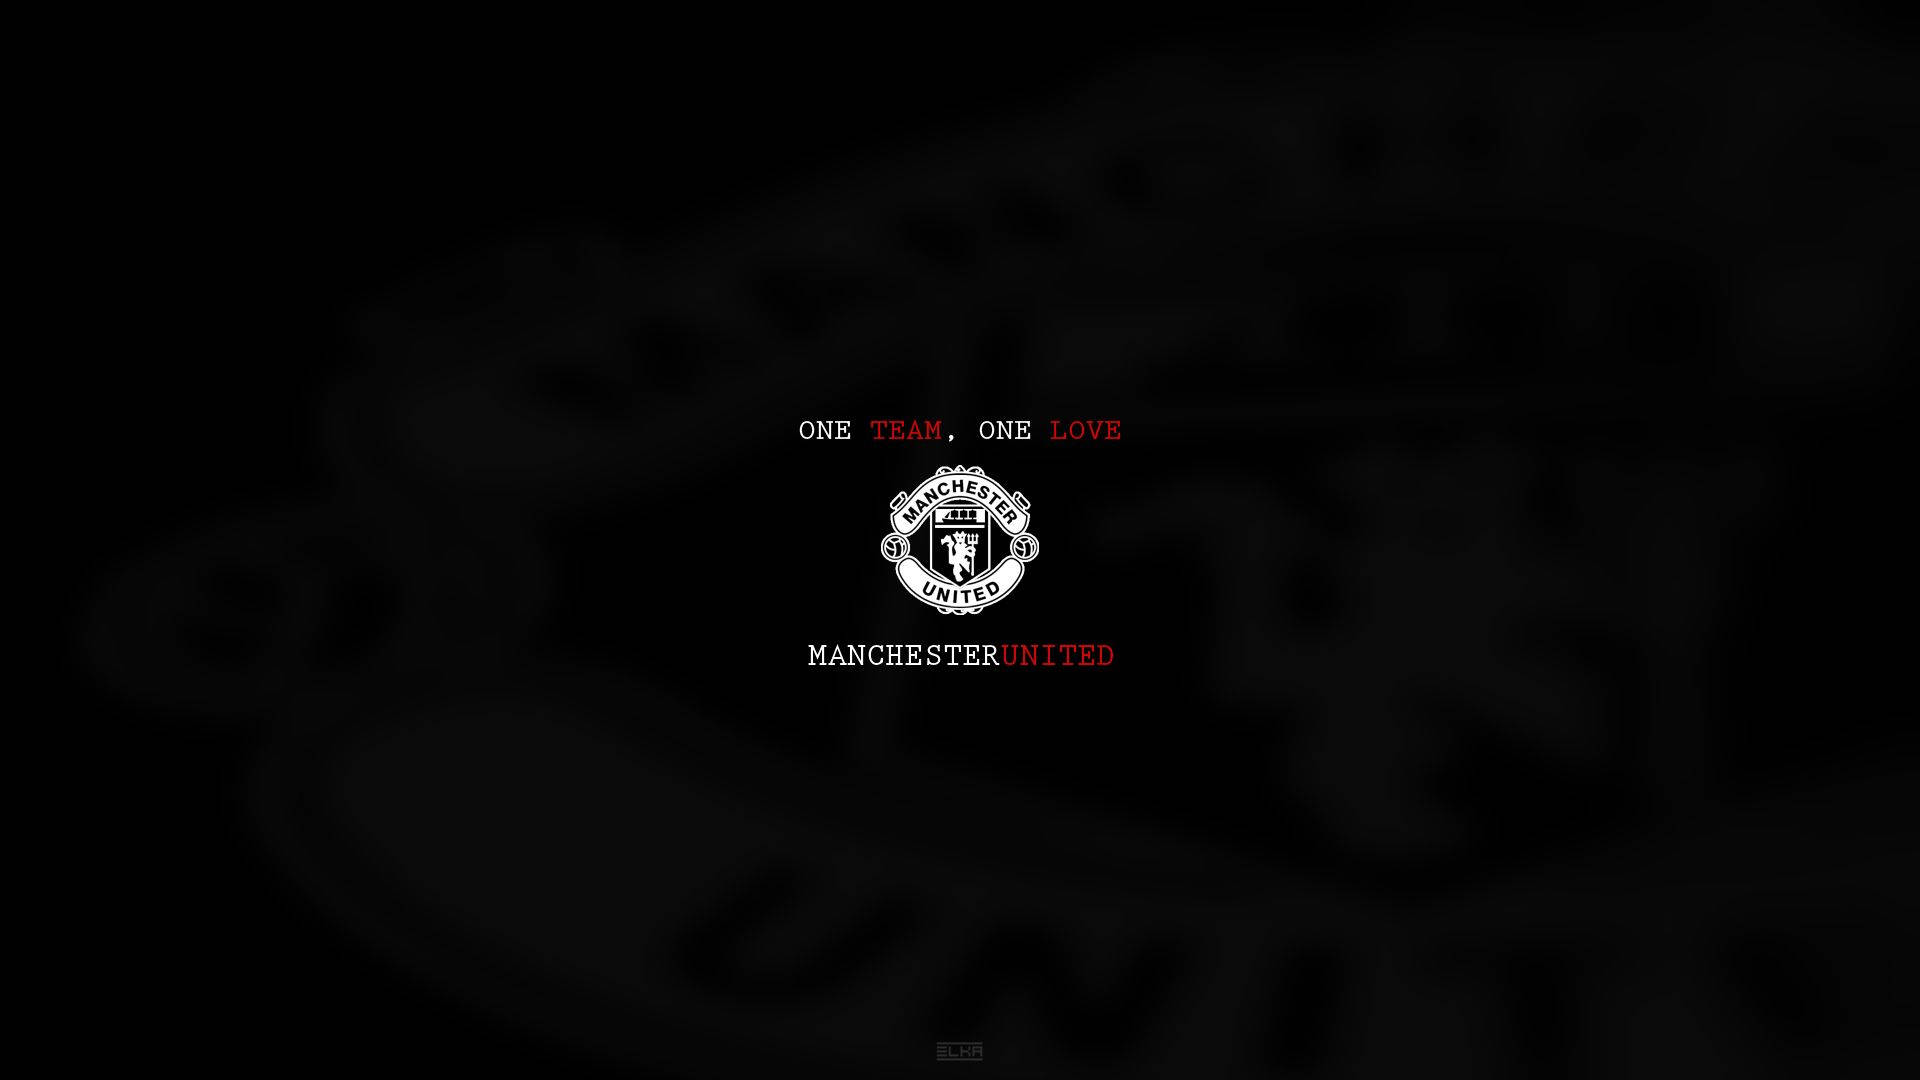 Download One Love Manchester United Wallpaper 